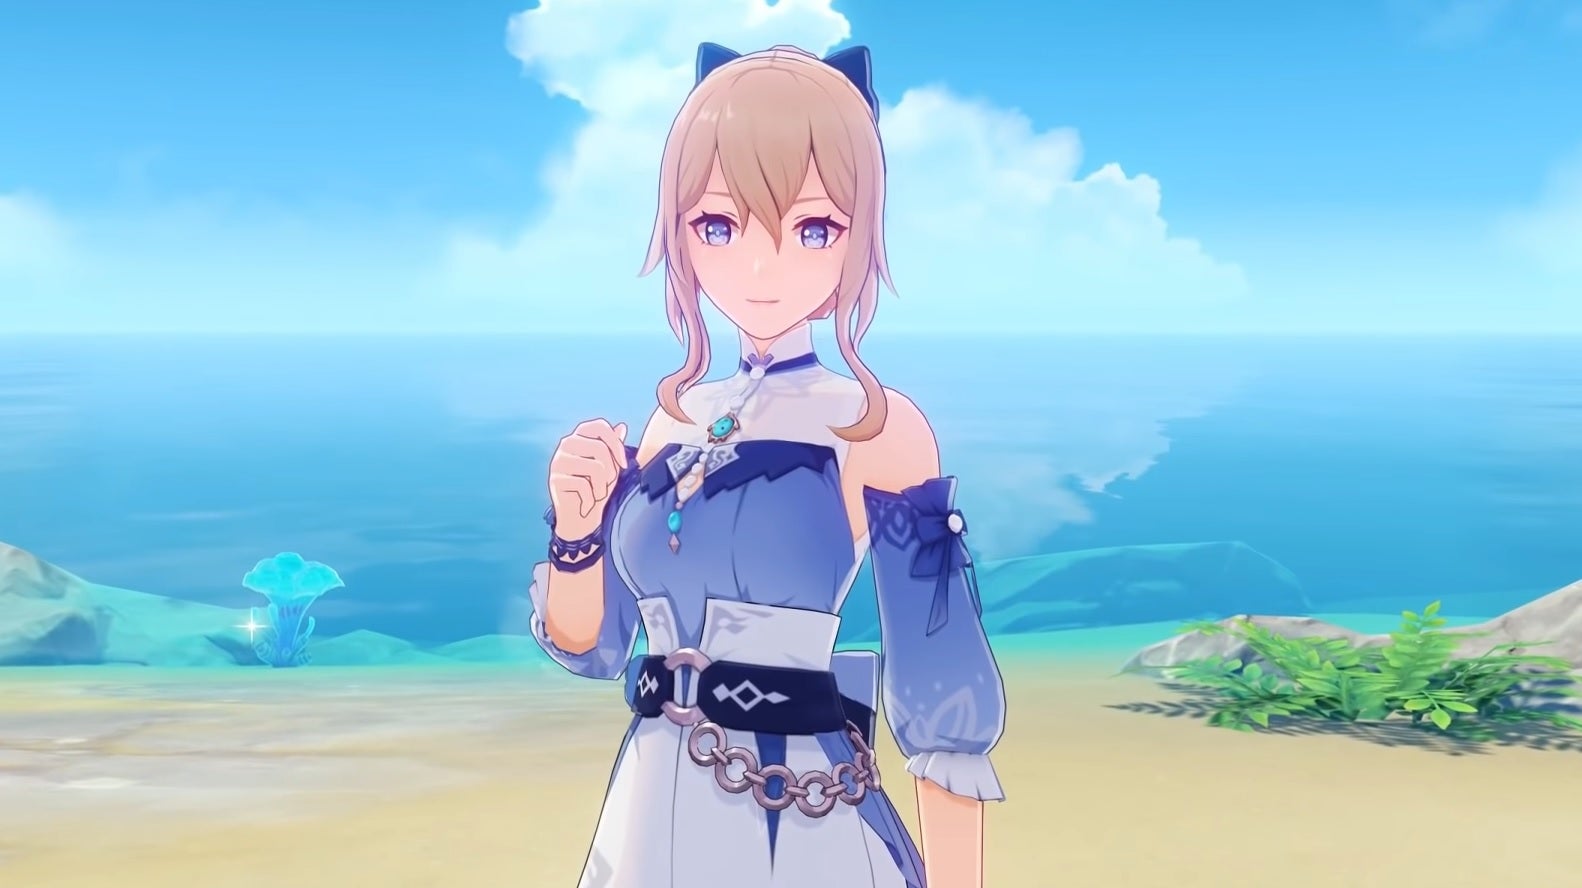 Genshin Impact - Jean's new summer character outfit added in update 1.6. She wears a casual blue dress with a high collar and belt with a hair bow.